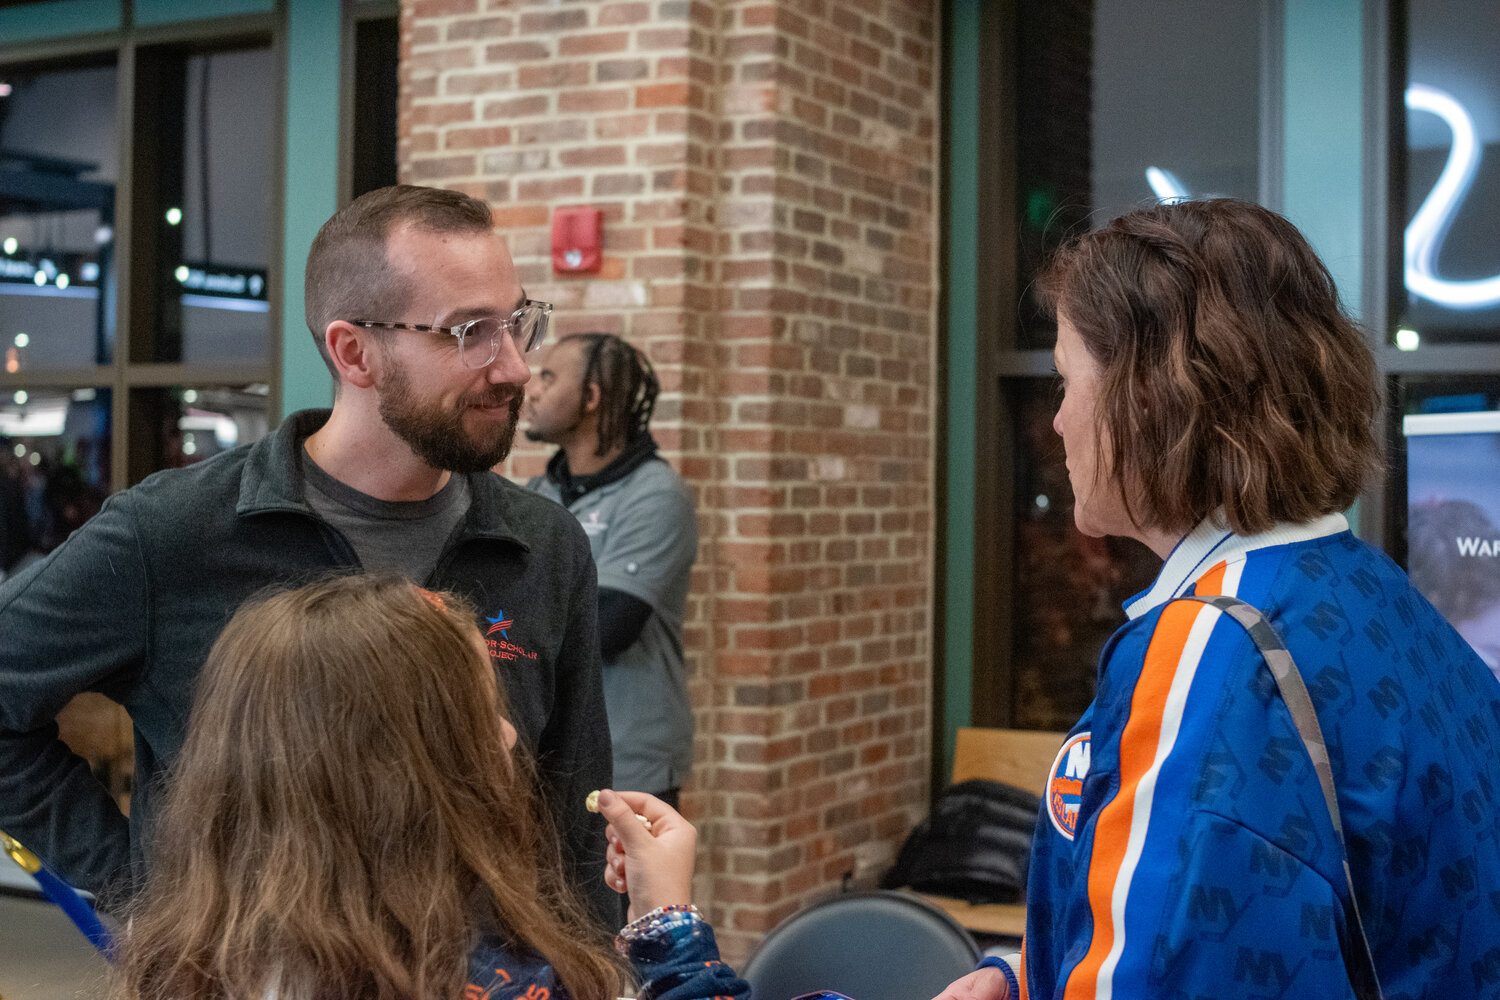 Ryan Pavel, chief executive of Warrior-Scholar Project, spoke with Gretchen Tine, 9, and Donna Tine about the opportunities the organization provides veterans during the New York Islanders military appreciation night on Nov. 11.